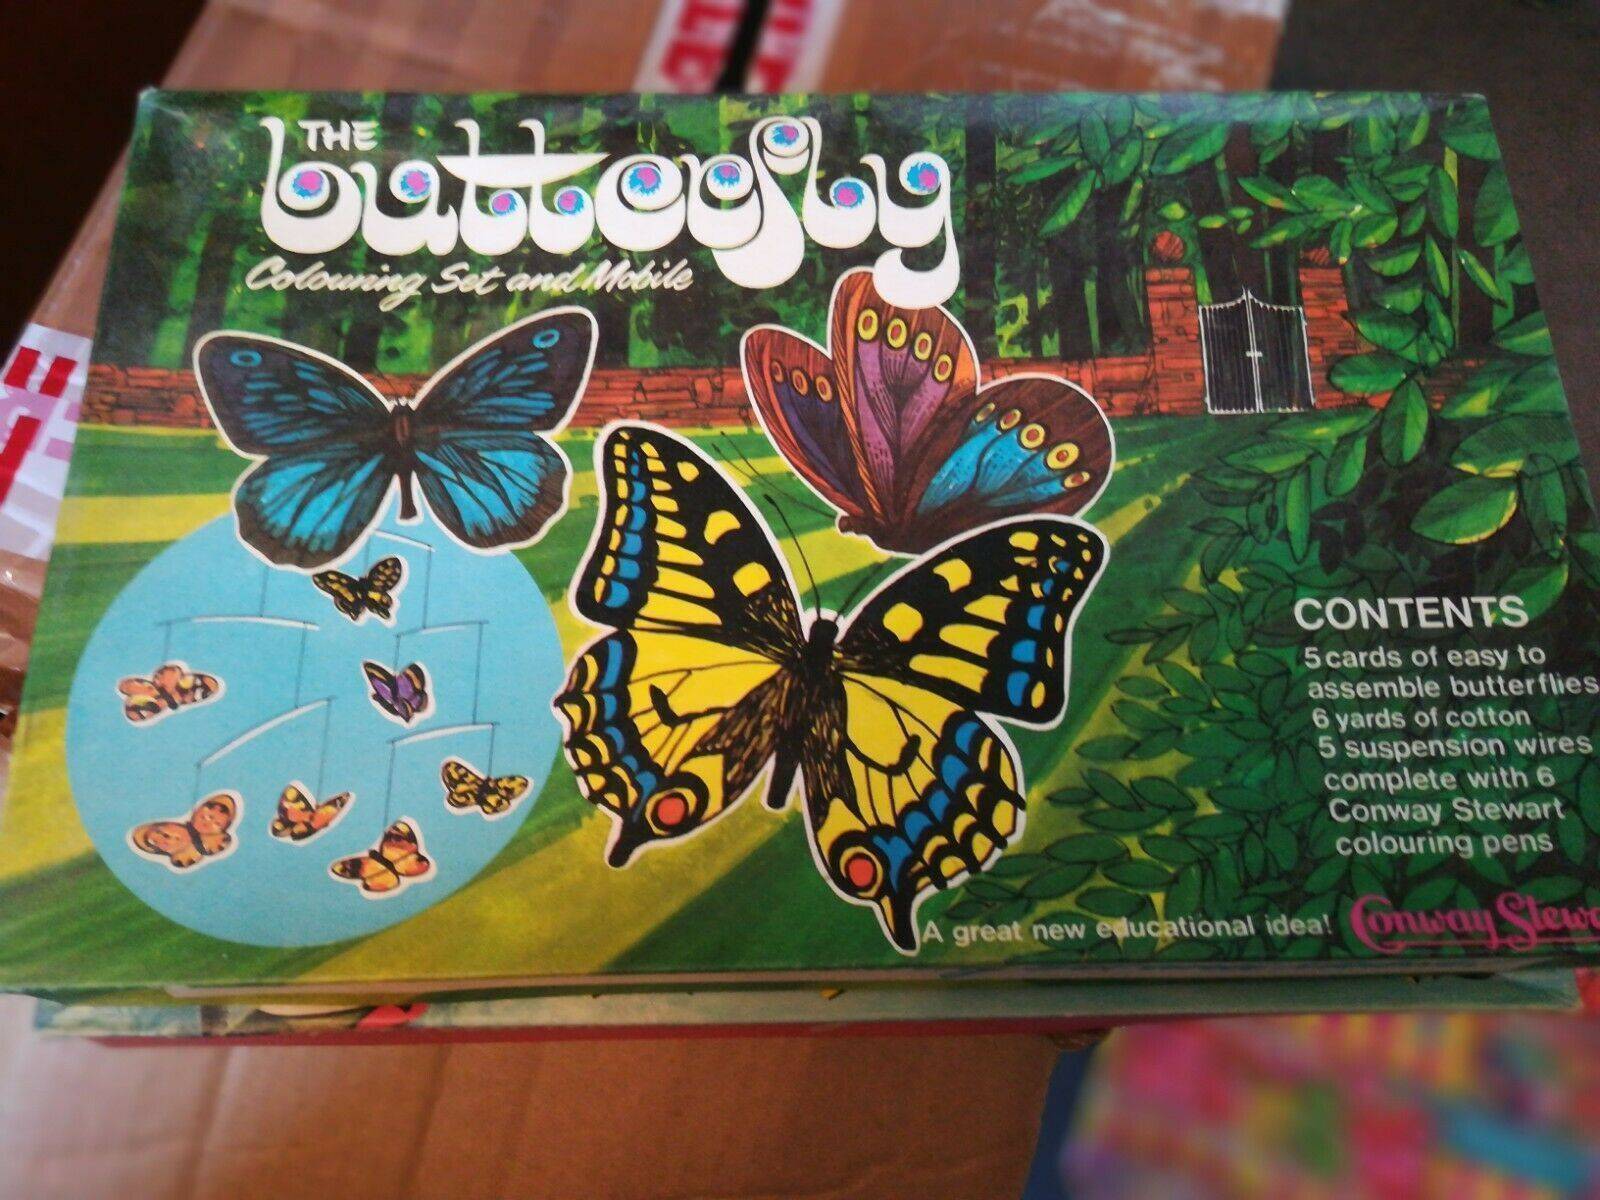 Conway Stewart The Butterfly Colouring Set and Mobile Toy 1.jpg